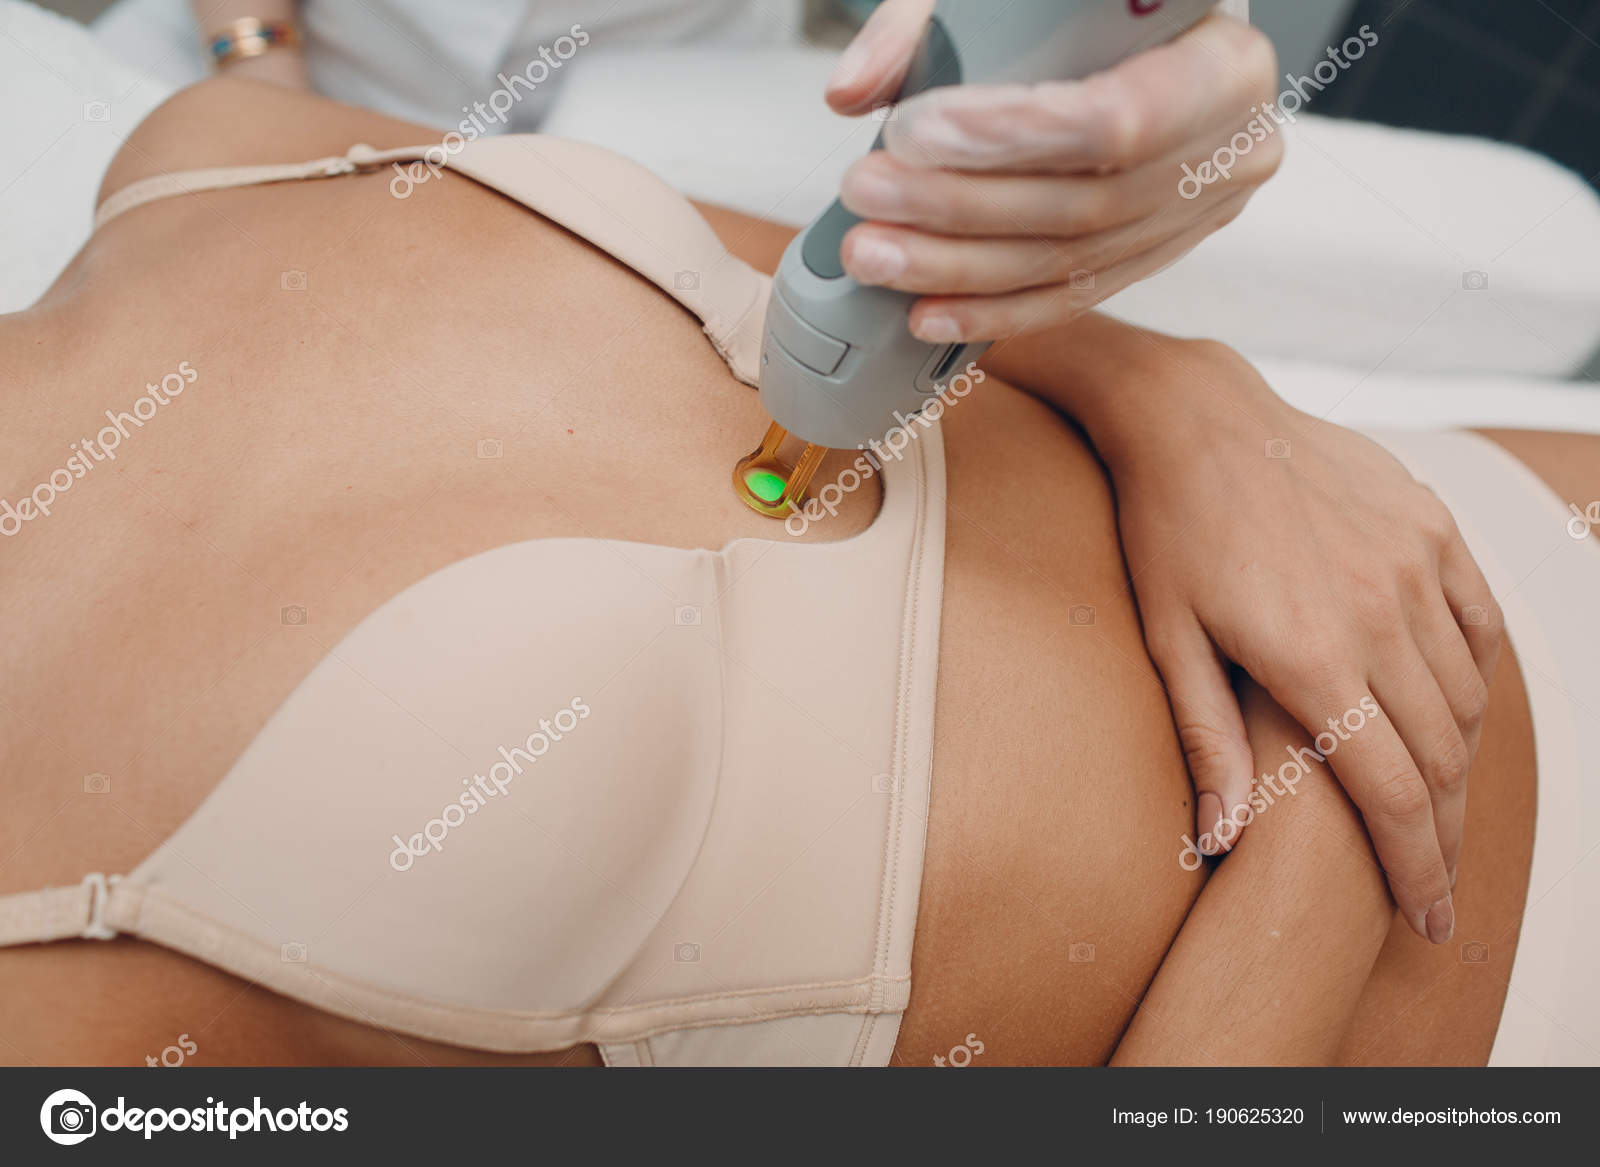 Breast removal Stock Photos, Royalty Free Breast removal Images |  Depositphotos